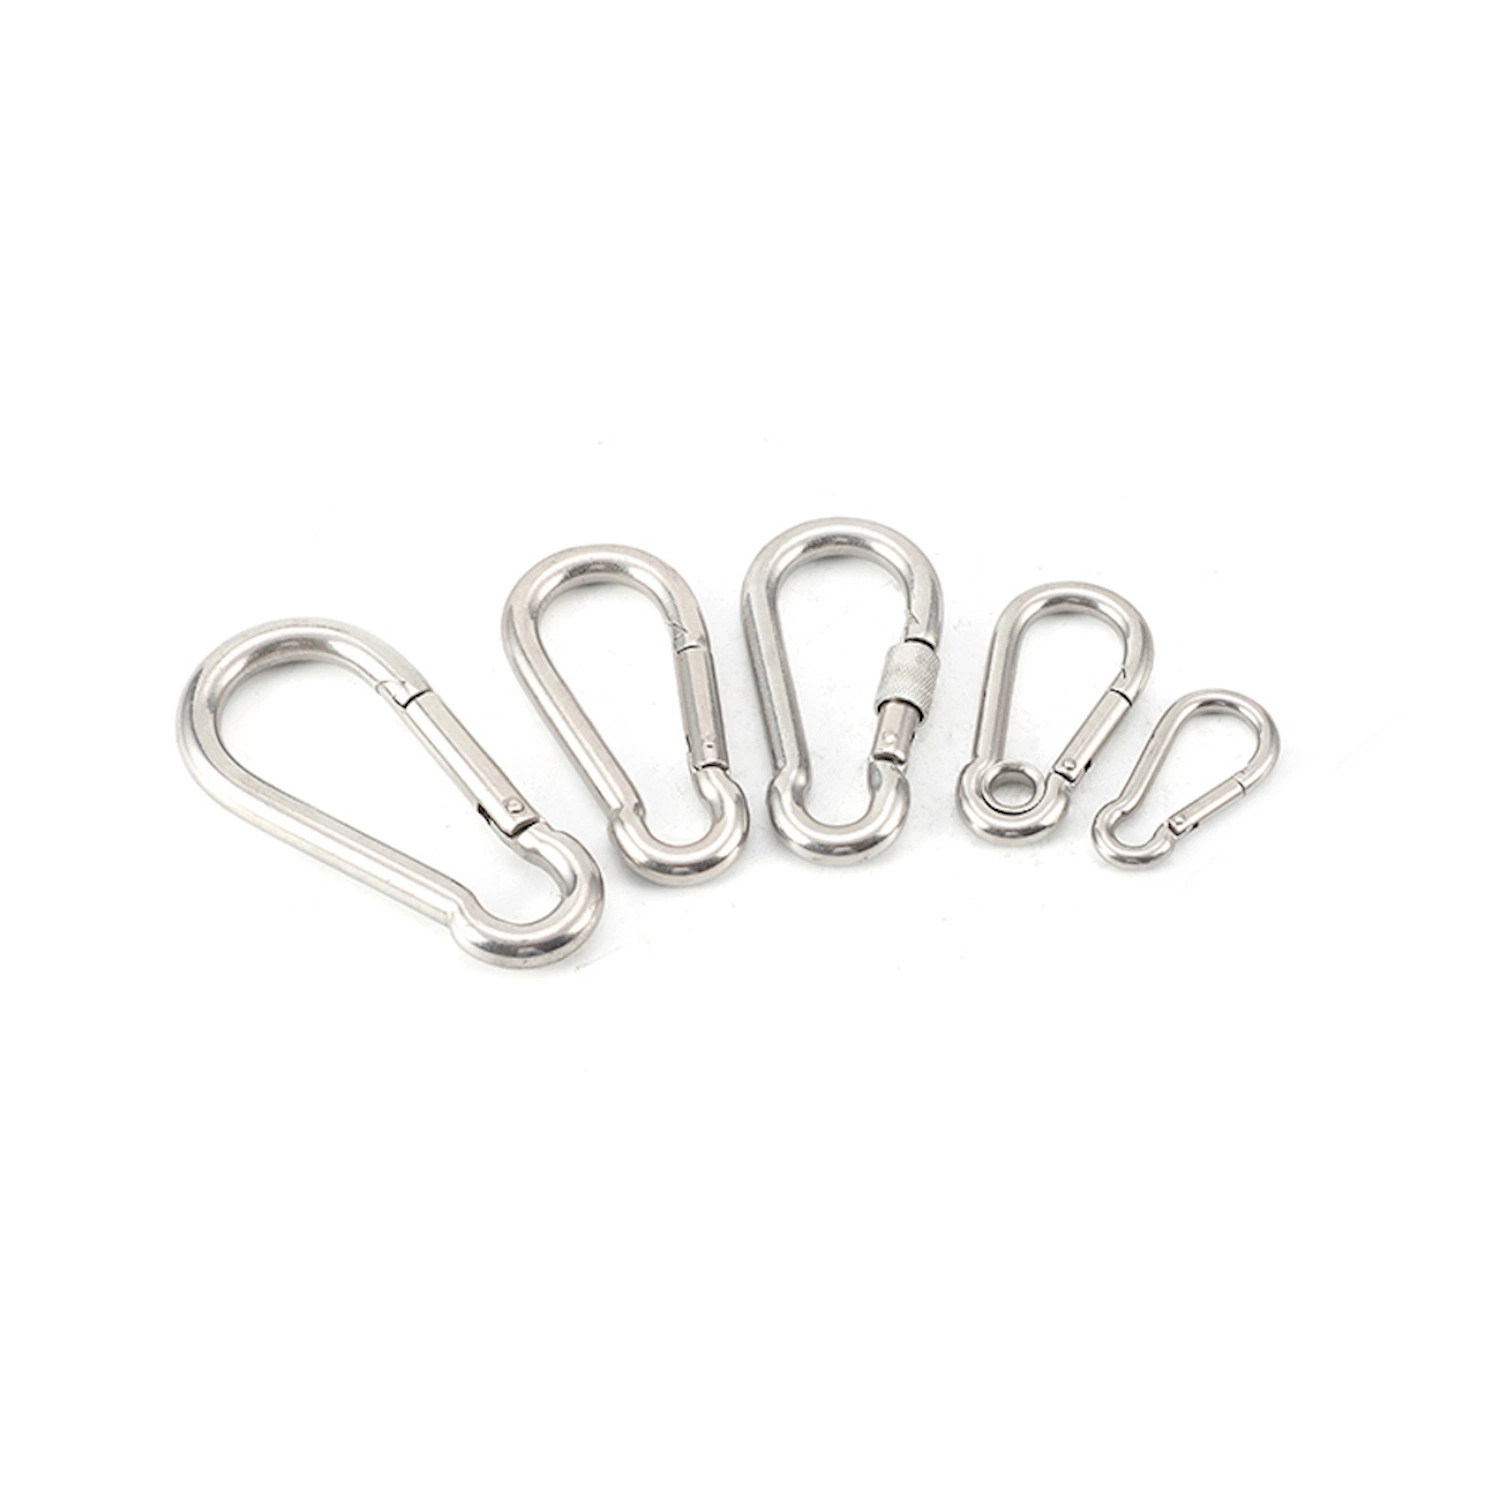 Rigging Hardware Stainless Steel Wire Rope Accessories Snap Hook